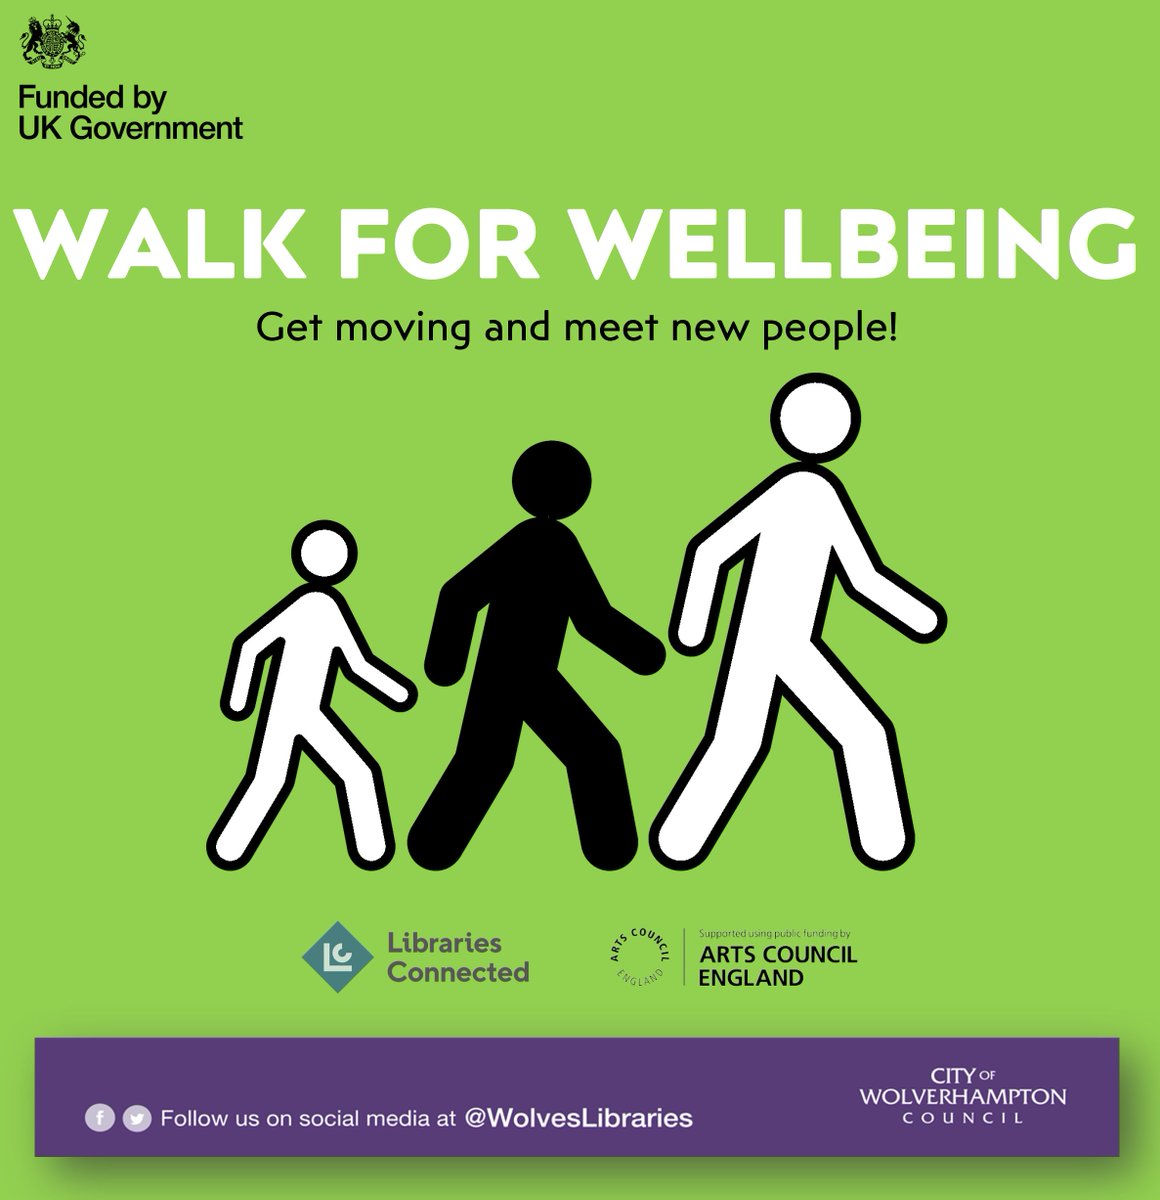 Walk for wellbeing - get moving and meet new people! Join our walking tours and walking groups this month and get yourself moving and talking with people from your local area ❤ Details: bit.ly/4aVRFFw Part of the Know Your Neighbourhood project